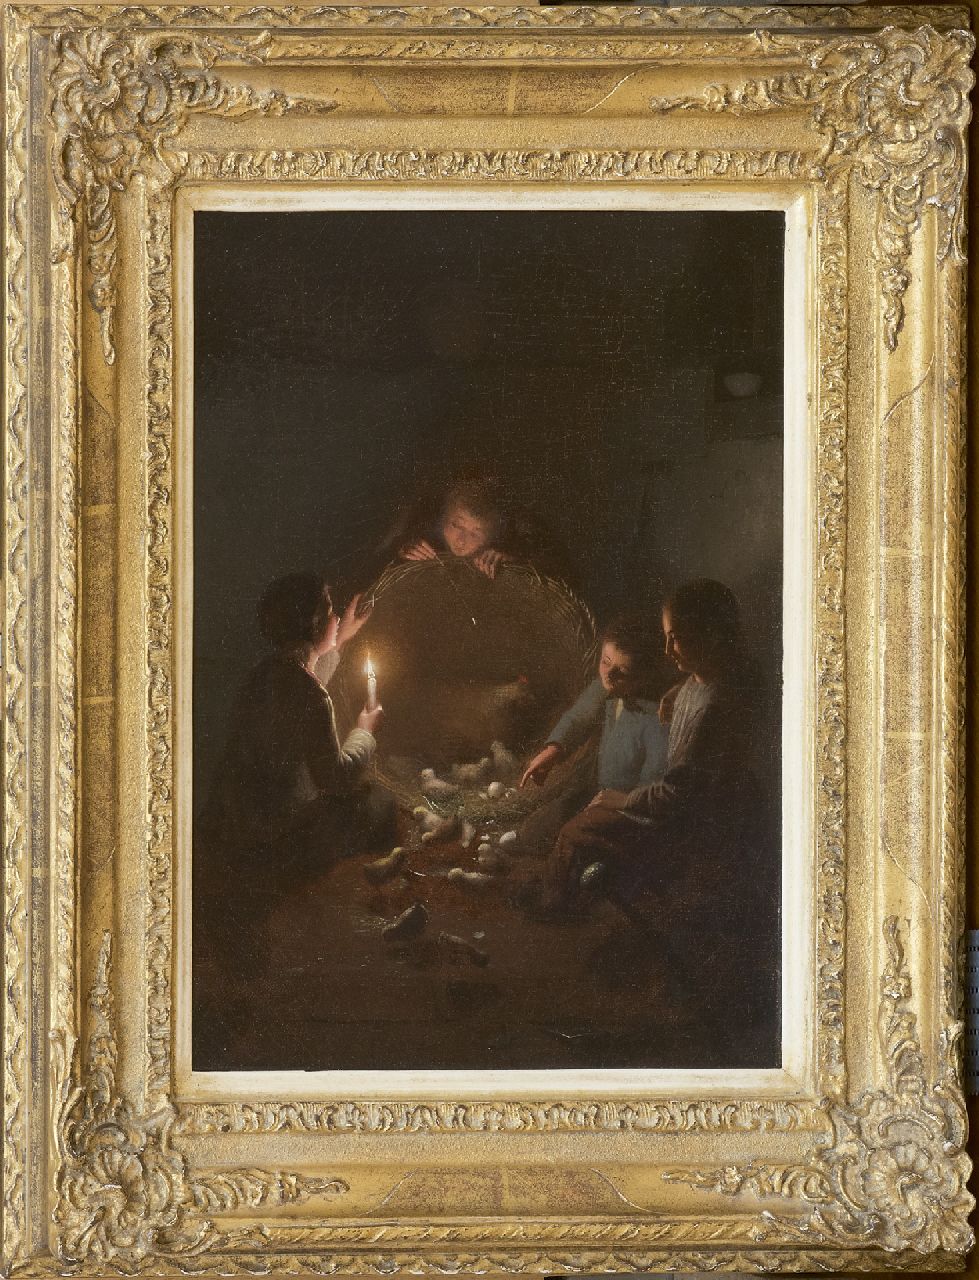 Rosierse J.  | Johannes Rosierse, A stable interior with chickens by candlelight, oil on canvas 36.0 x 27.3 cm, signed l.r.